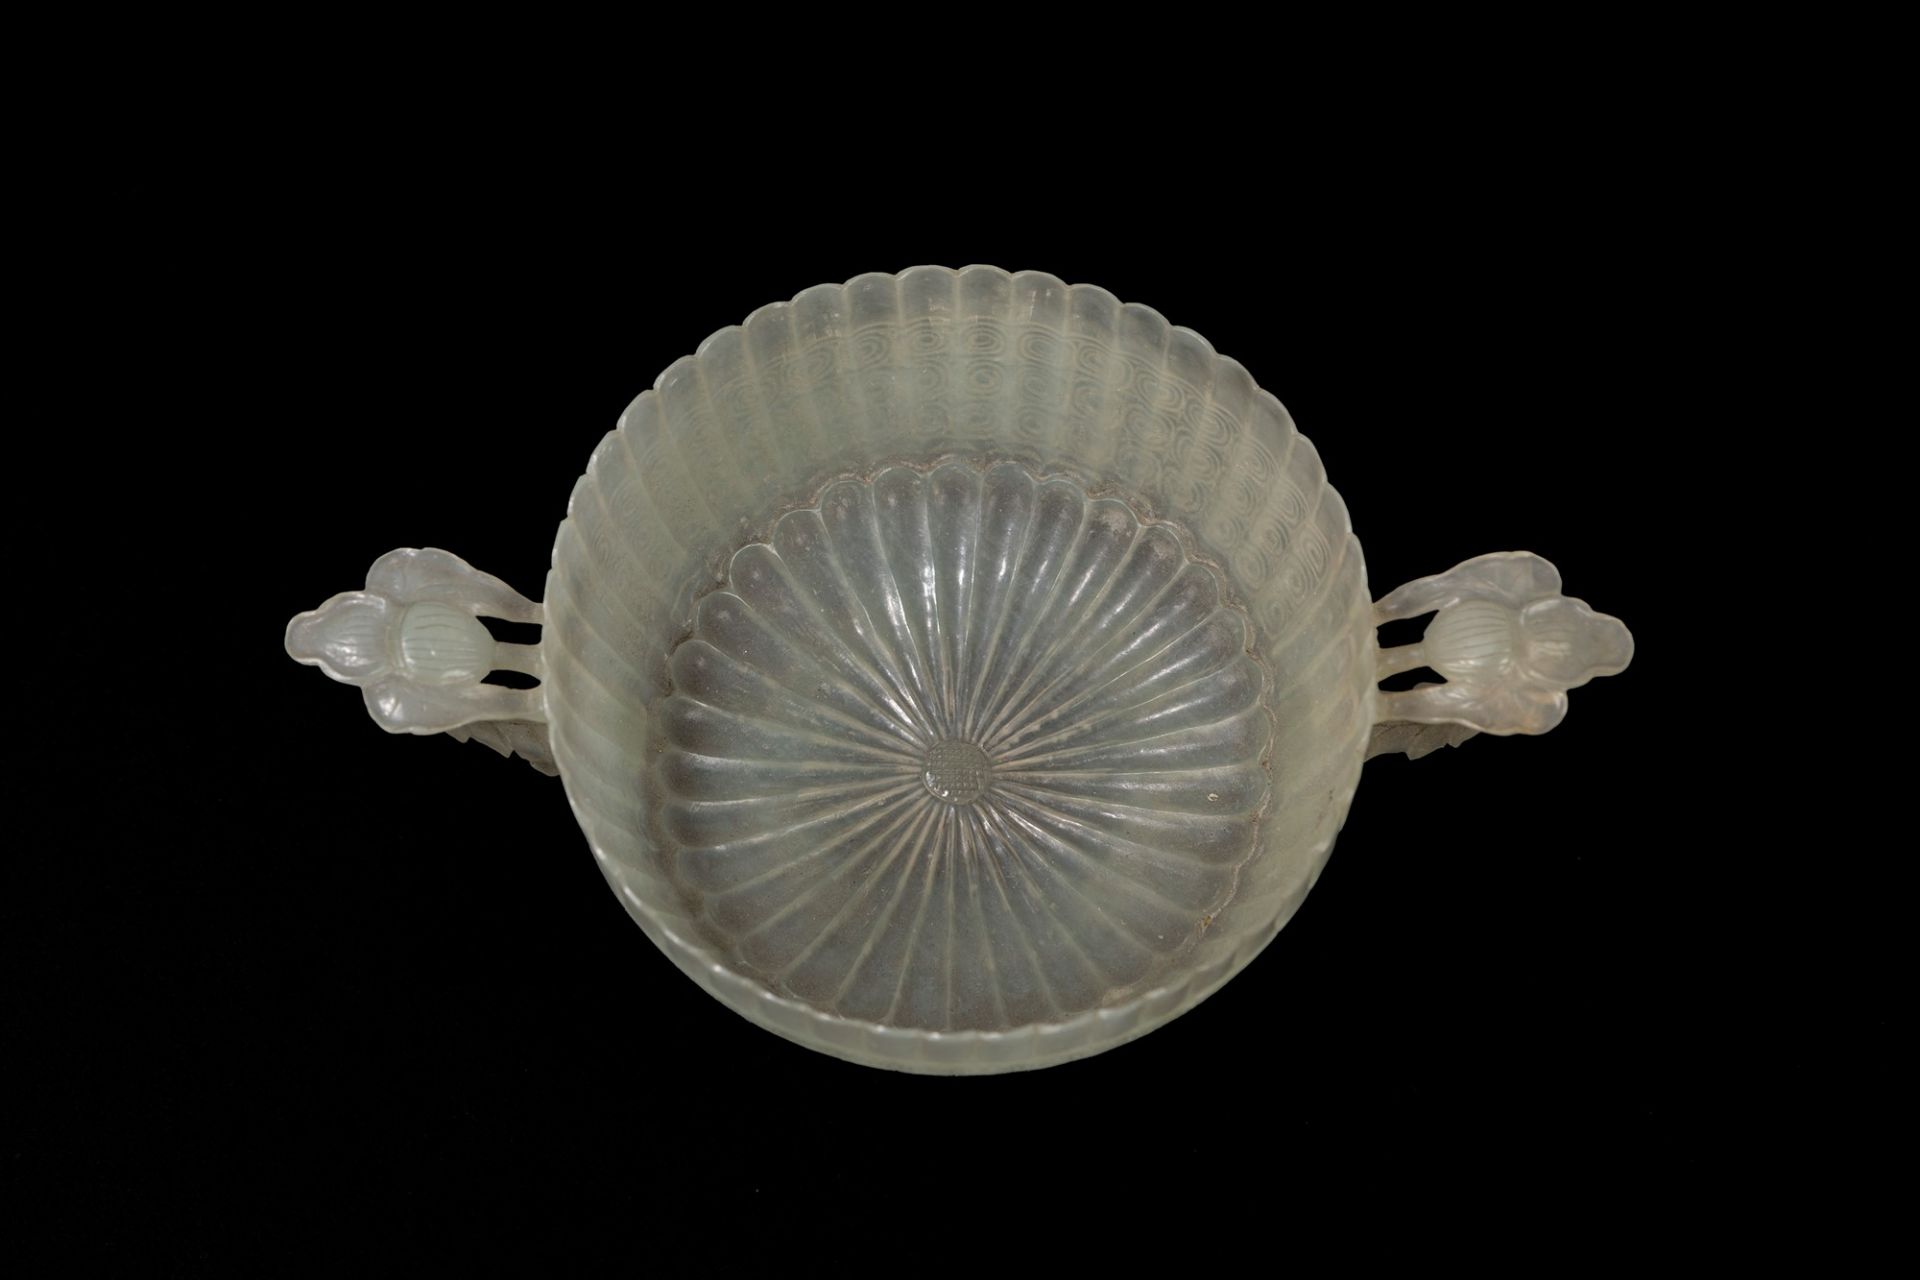 A SMALL CARVED JADE MUGHAL STYLE TWIN HANDLE CHRYSANTHEMUM SHAPE CUP, China, Qing dynasty, 19th cent - Image 4 of 4